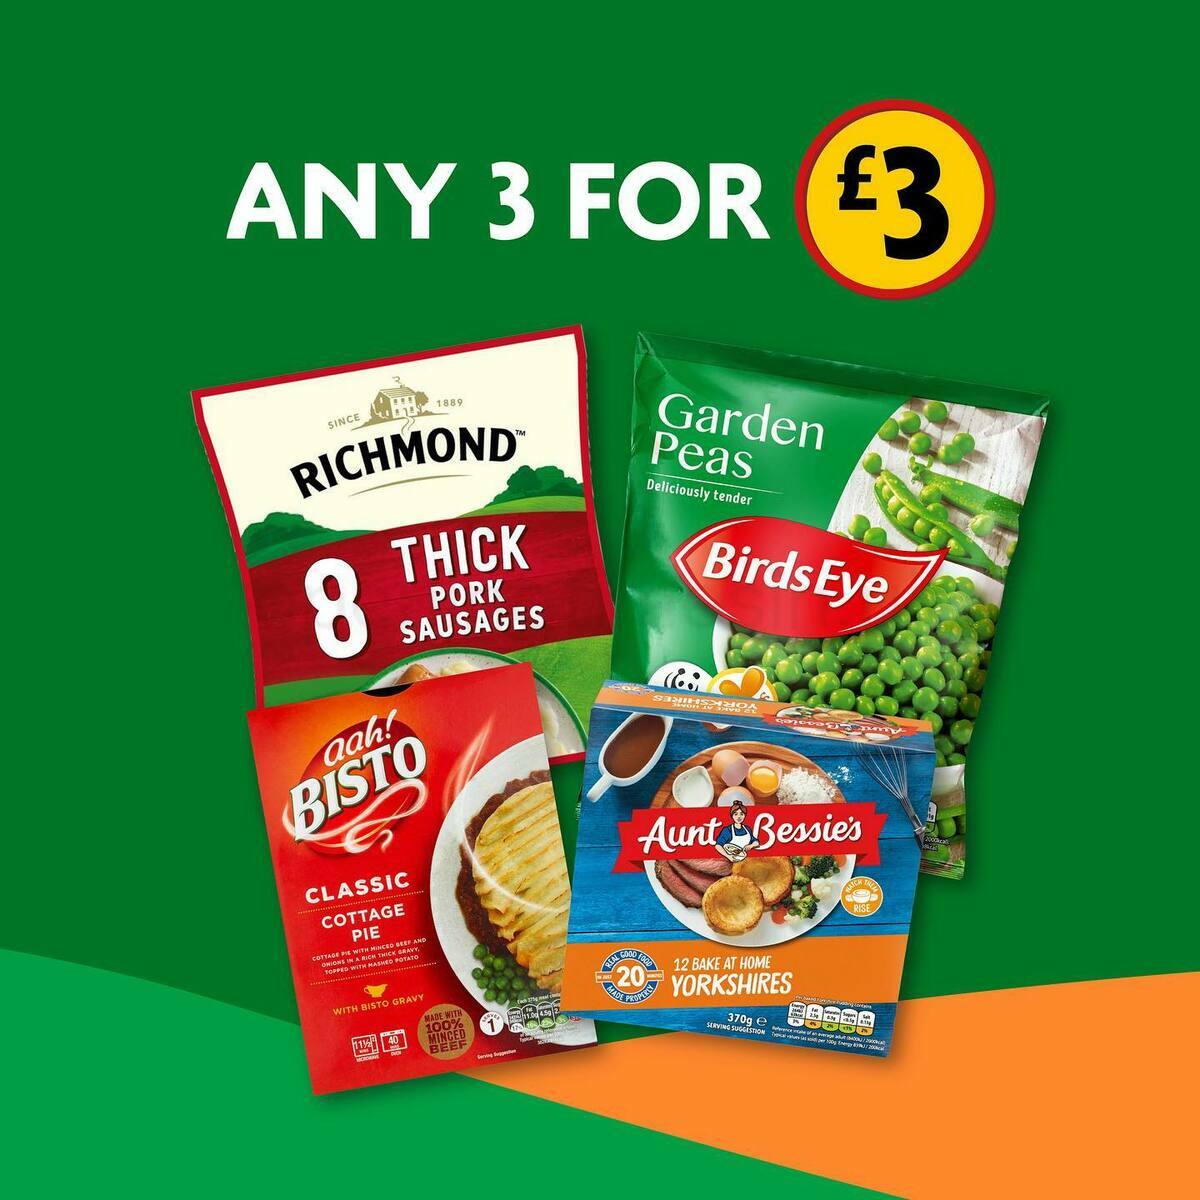 Morrisons Offers from 19 January